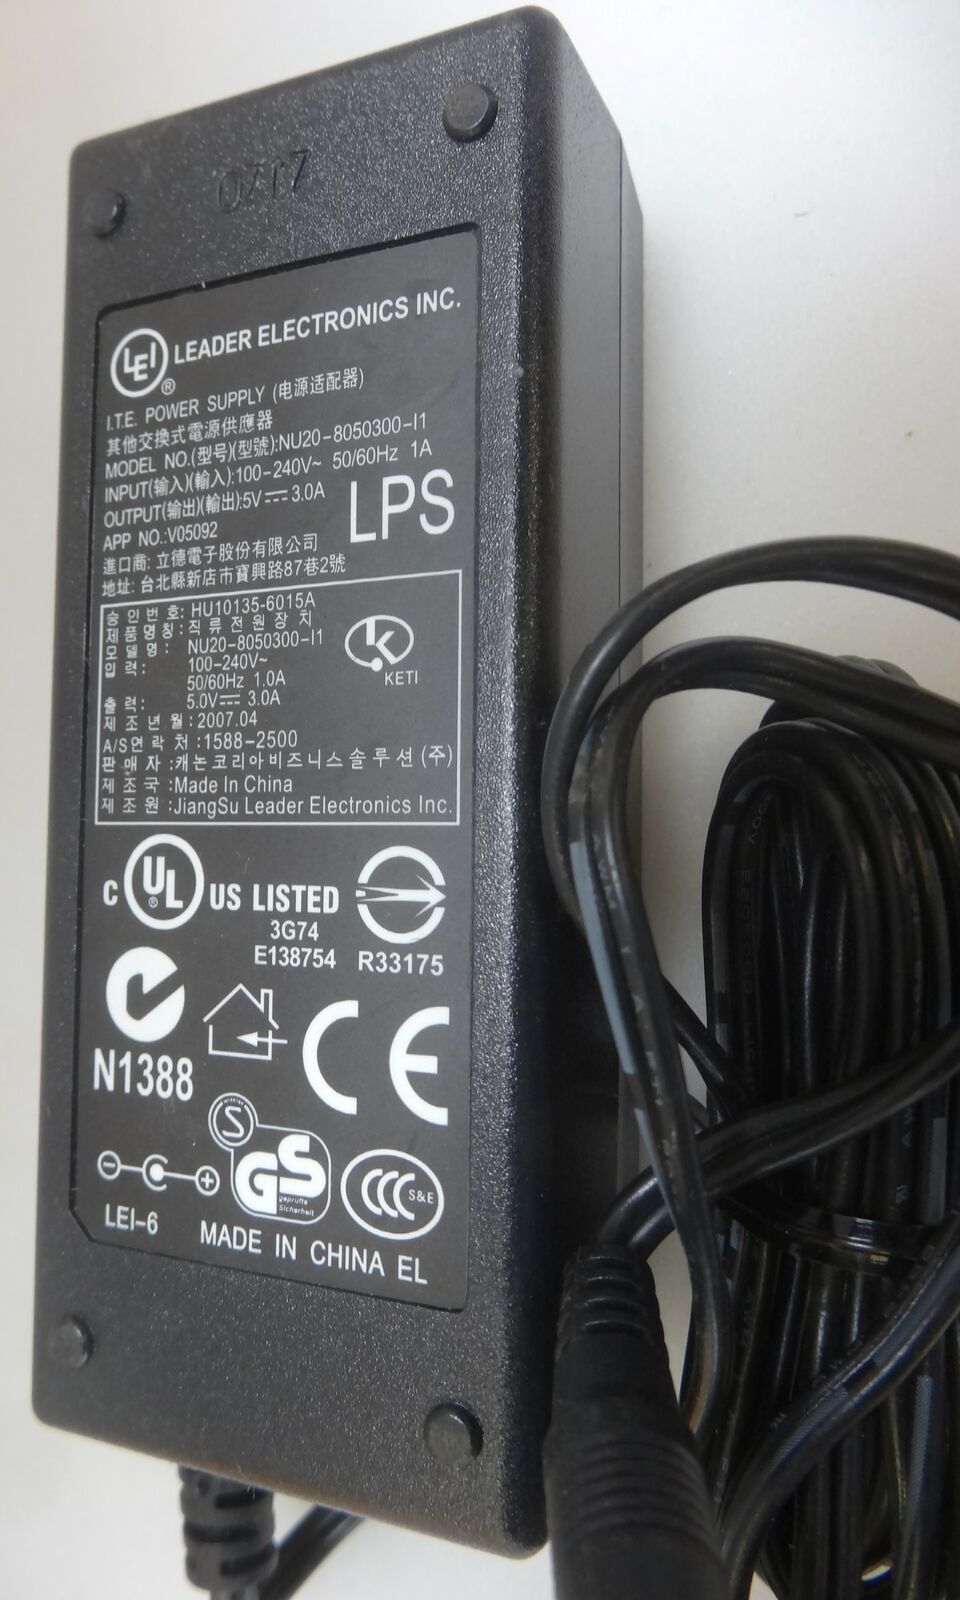 New LEI NU20-8050300-I1 Adapter 5V 3.0A Charger for Laptop Power Supply - Click Image to Close